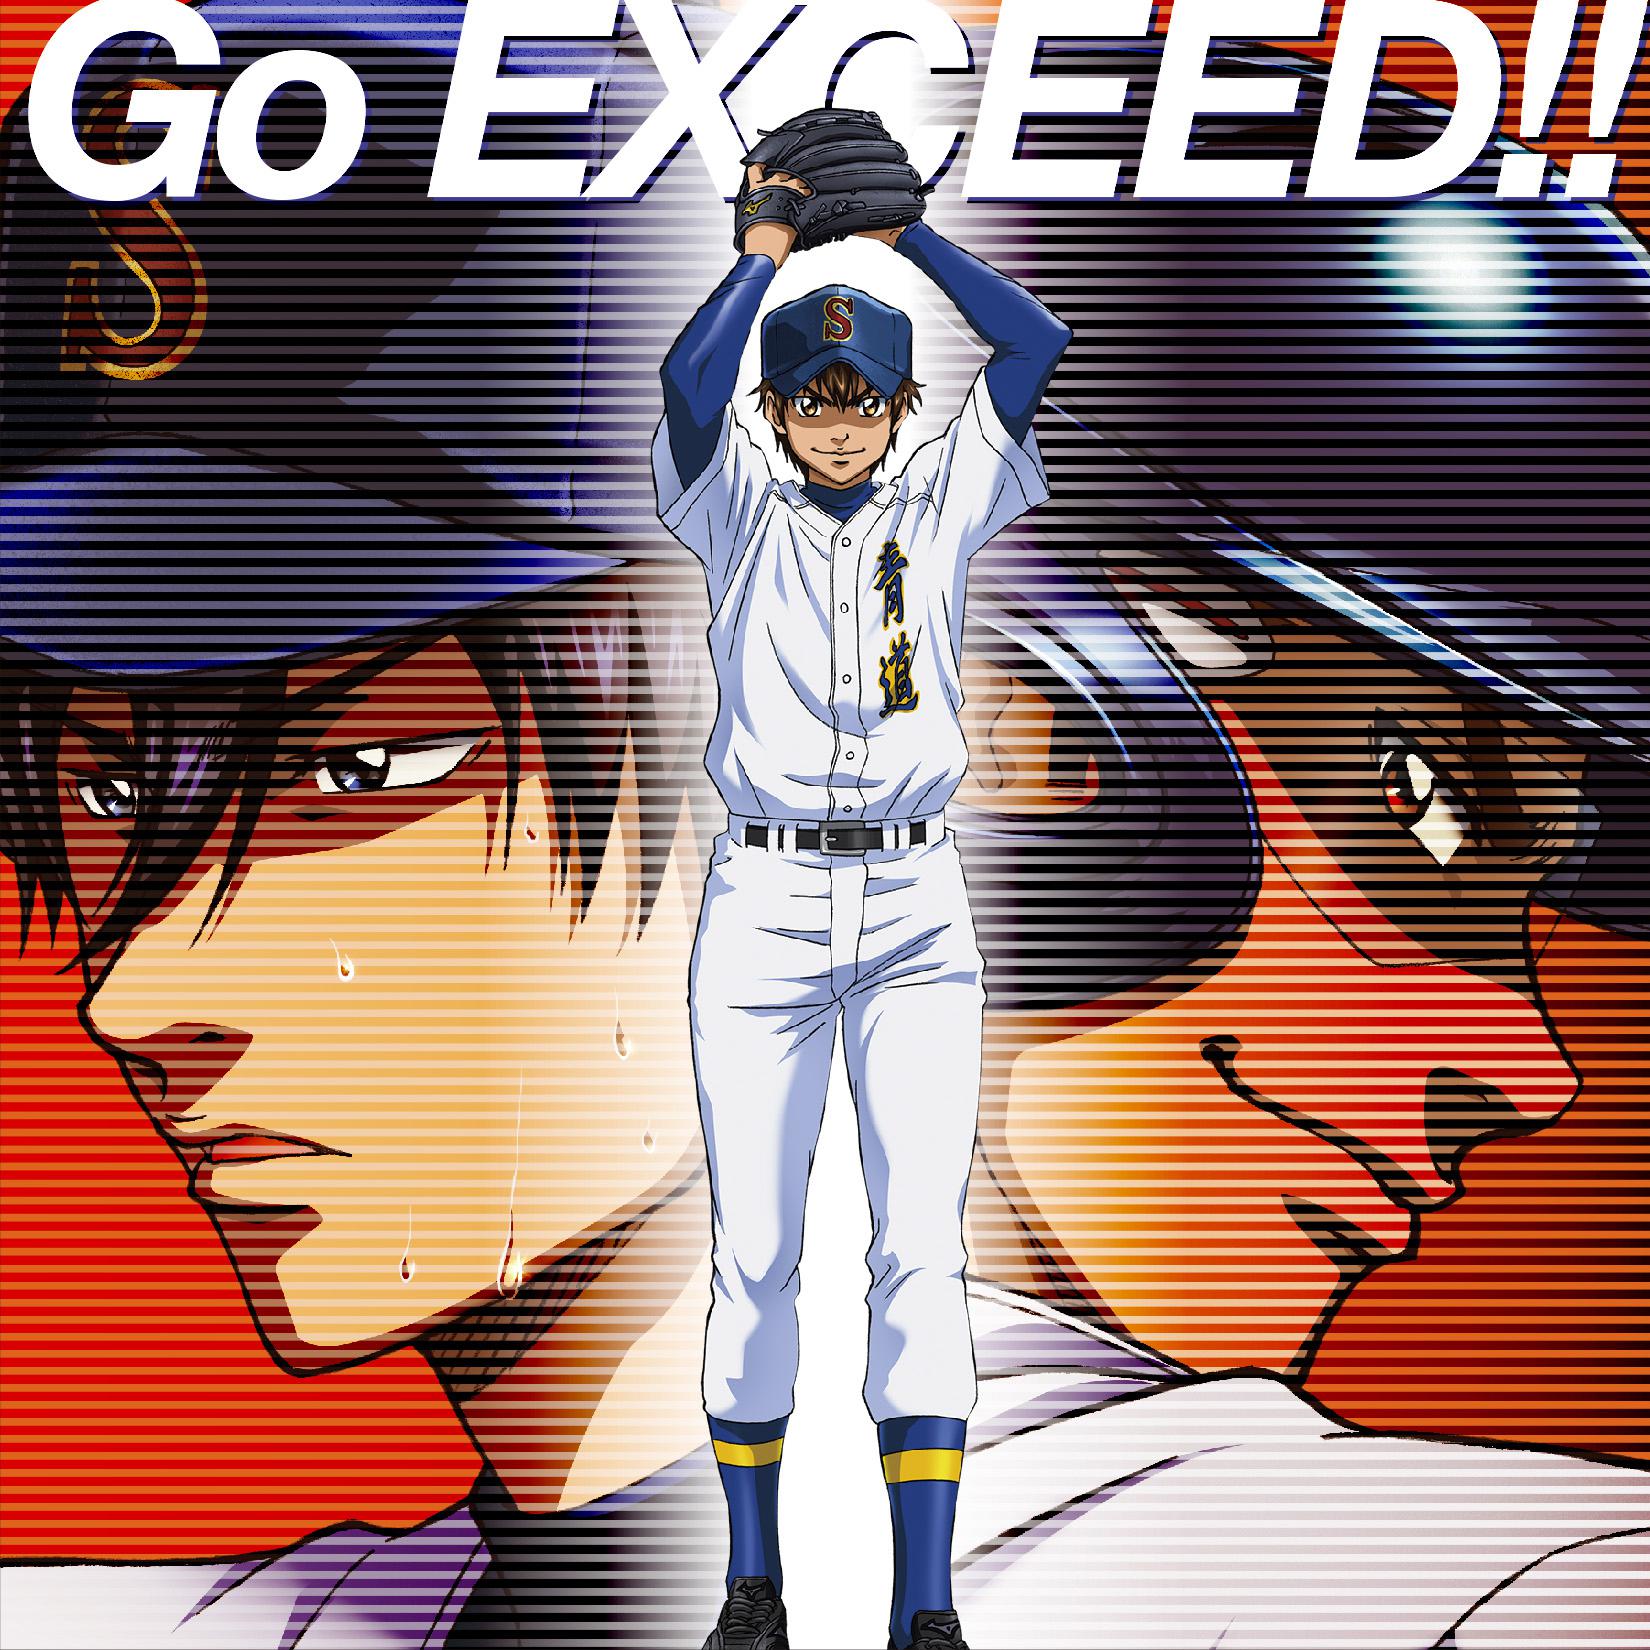 Go EXCEED!!专辑